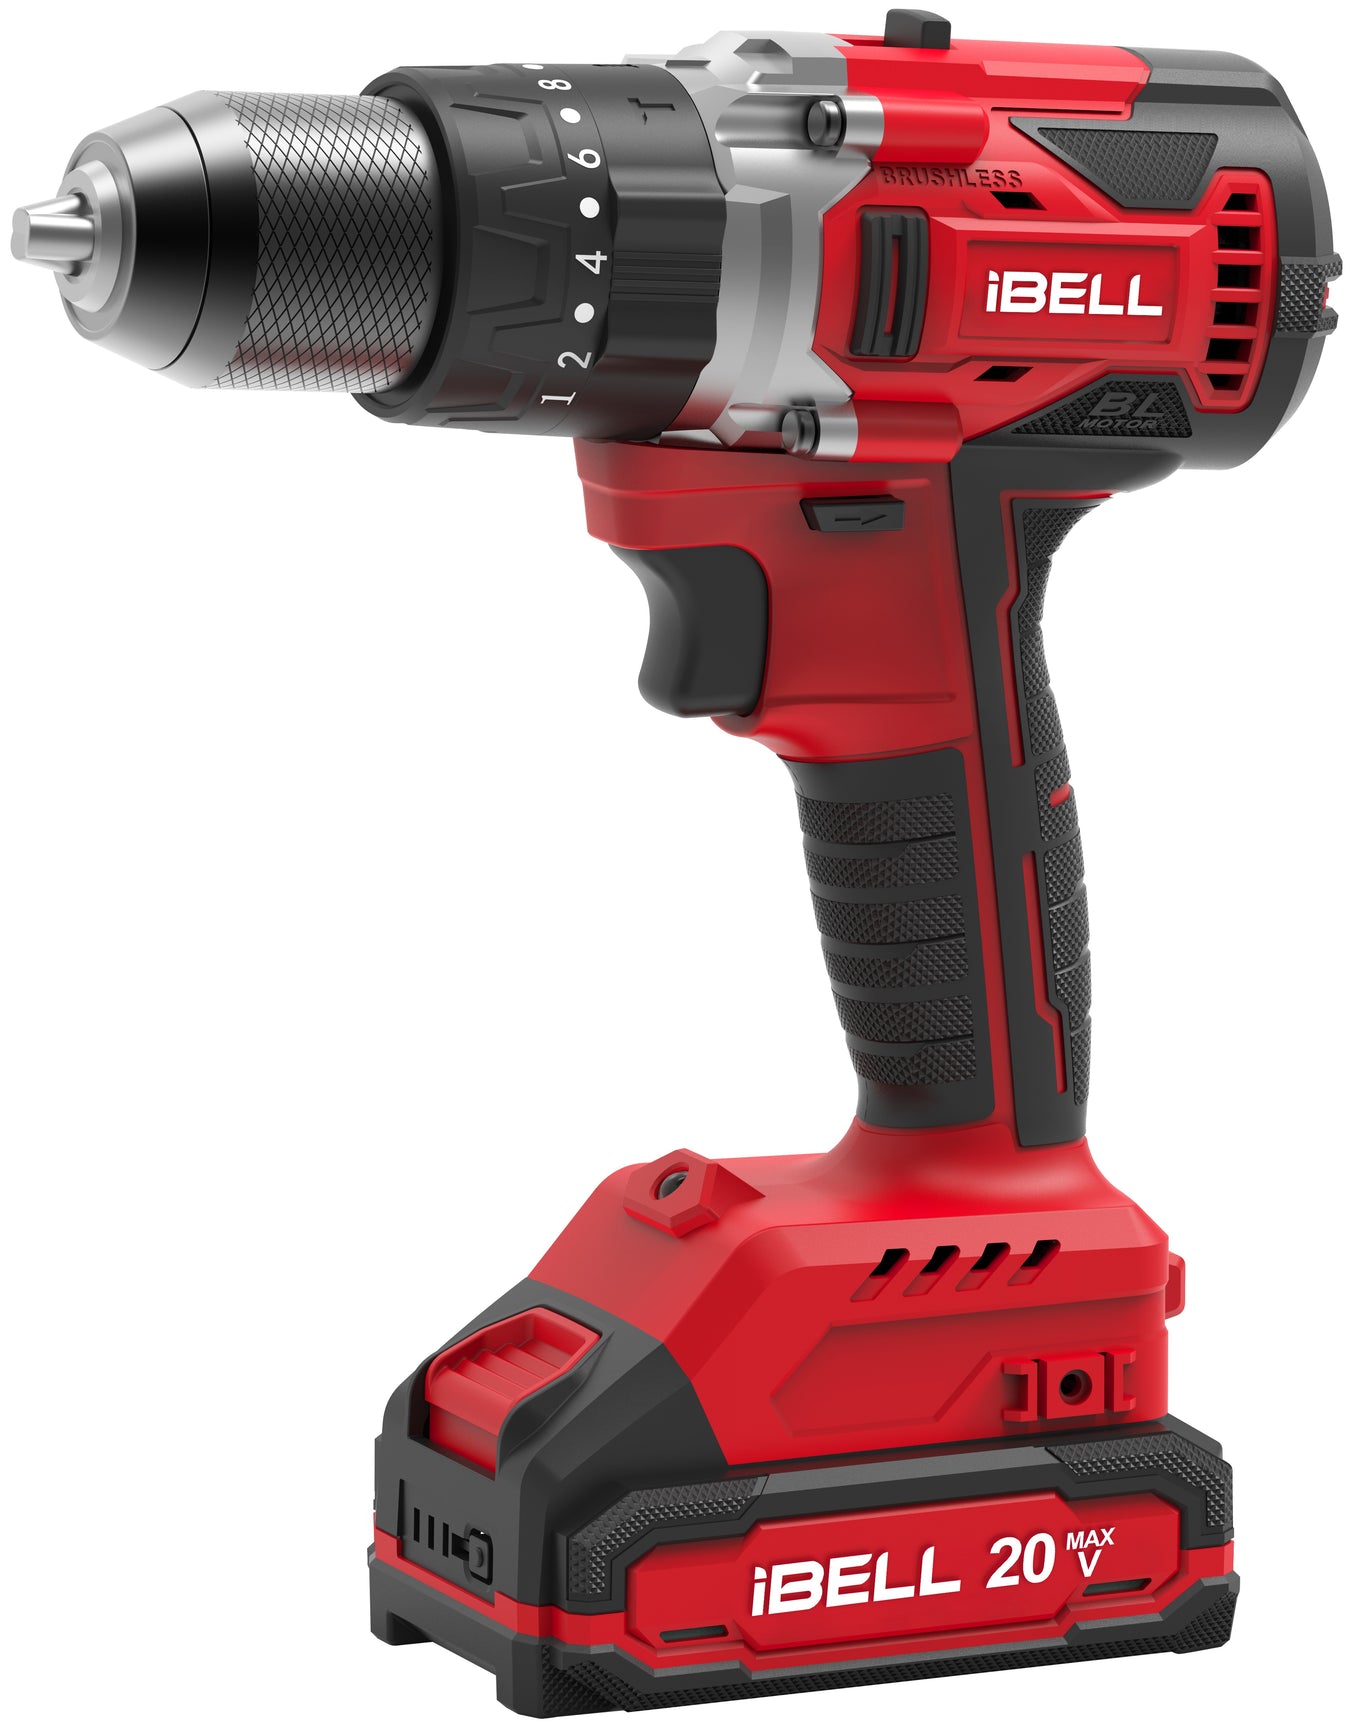 One Power Series Drill Combo